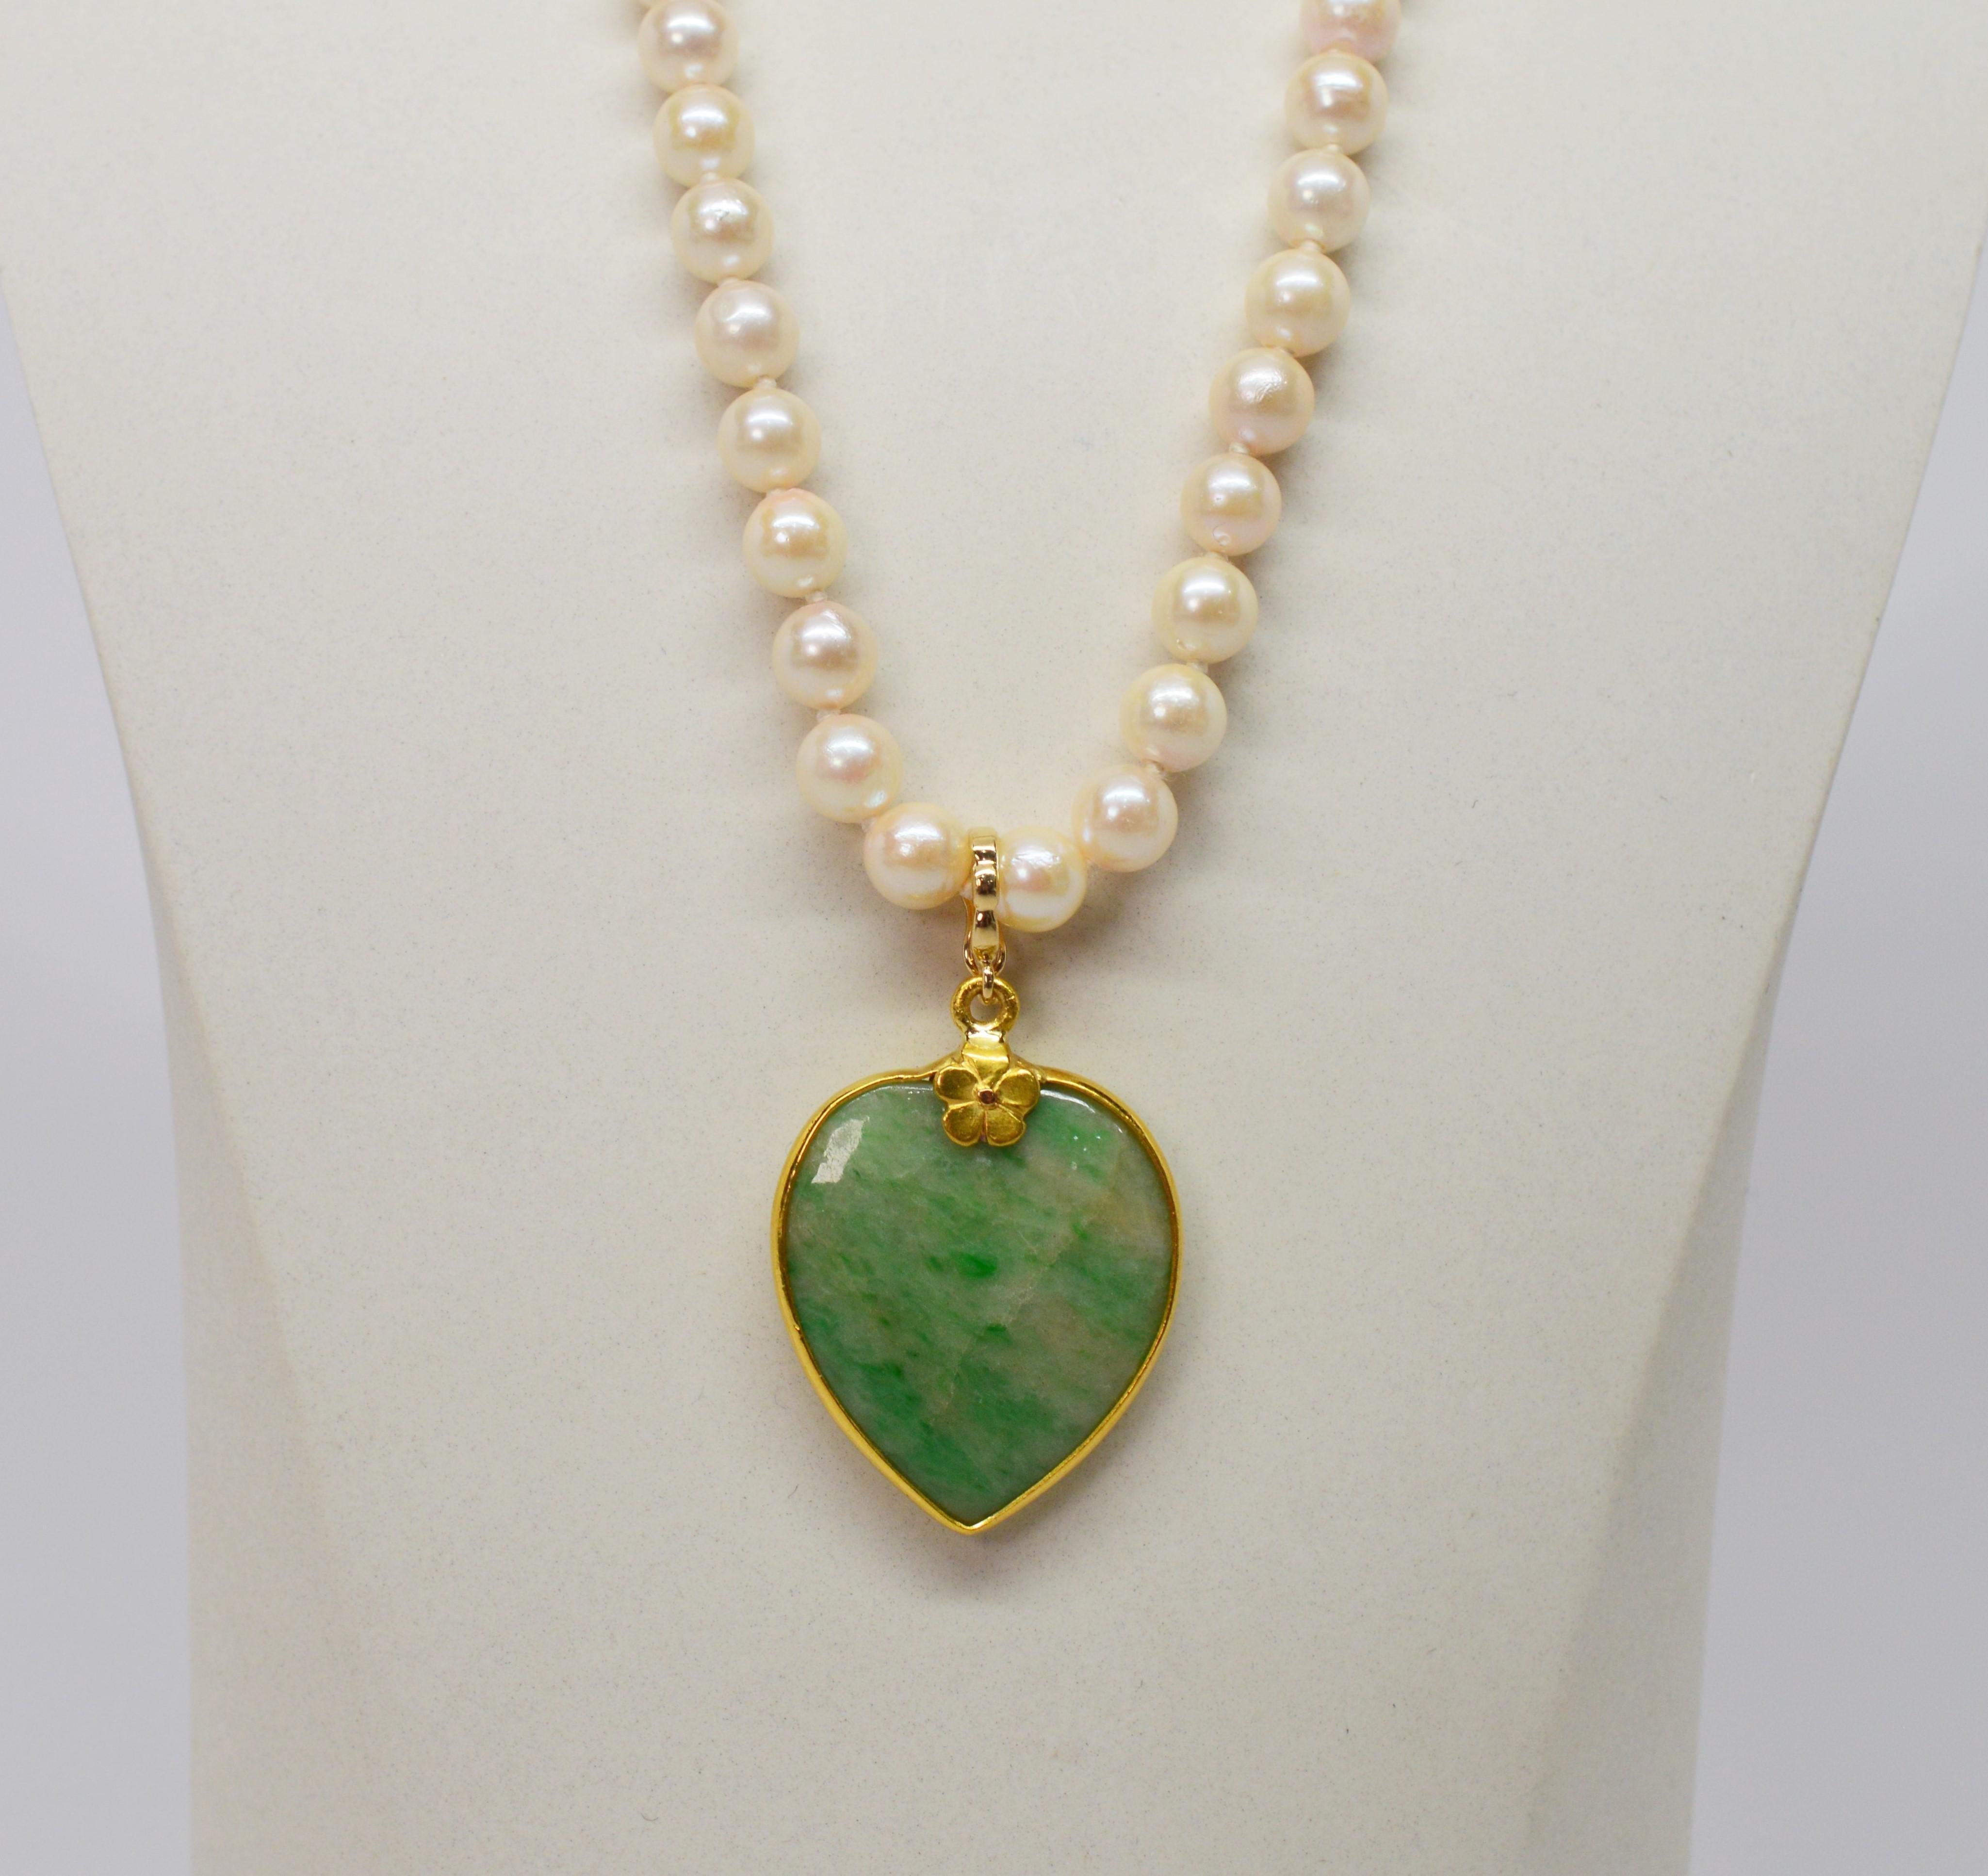 This romantic antique piece features a soft green natural jade heart pendant framed in fourteen karat gold suspended on an eighteen inch classic
strand of 5-1/2mm x 6mm pearls finished with a decorative fourteen karat gold barrel clasp. The jade